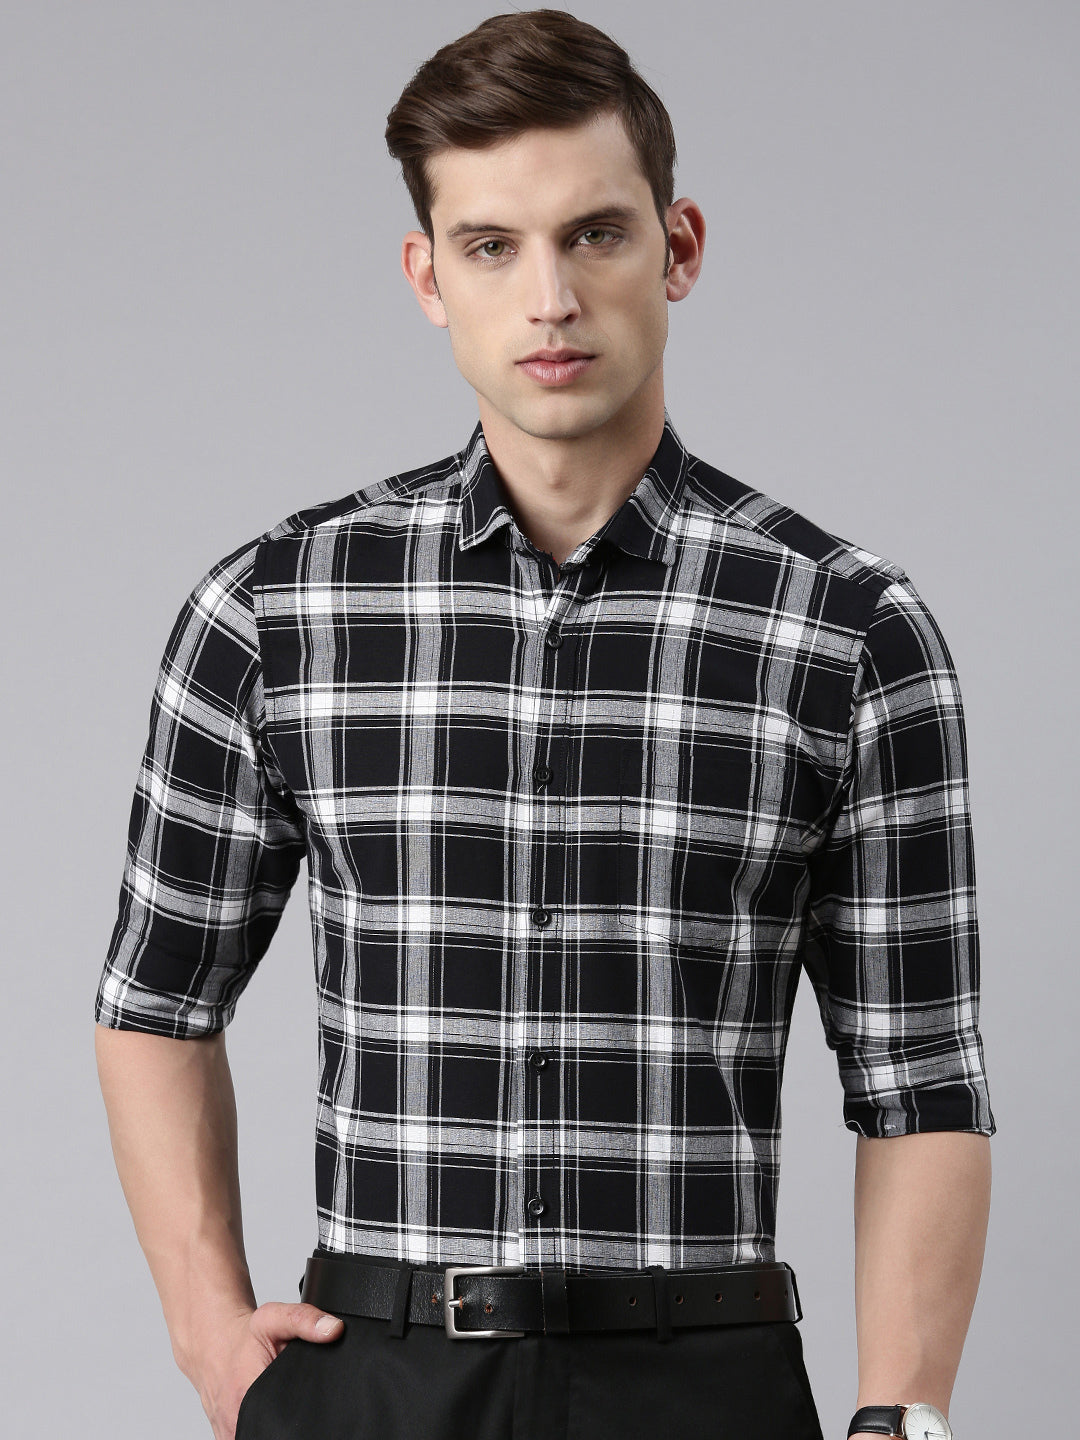 5thanfold Men's Formal Pure Cotton Full Sleeve Checkered Black Slim Fit Shirt